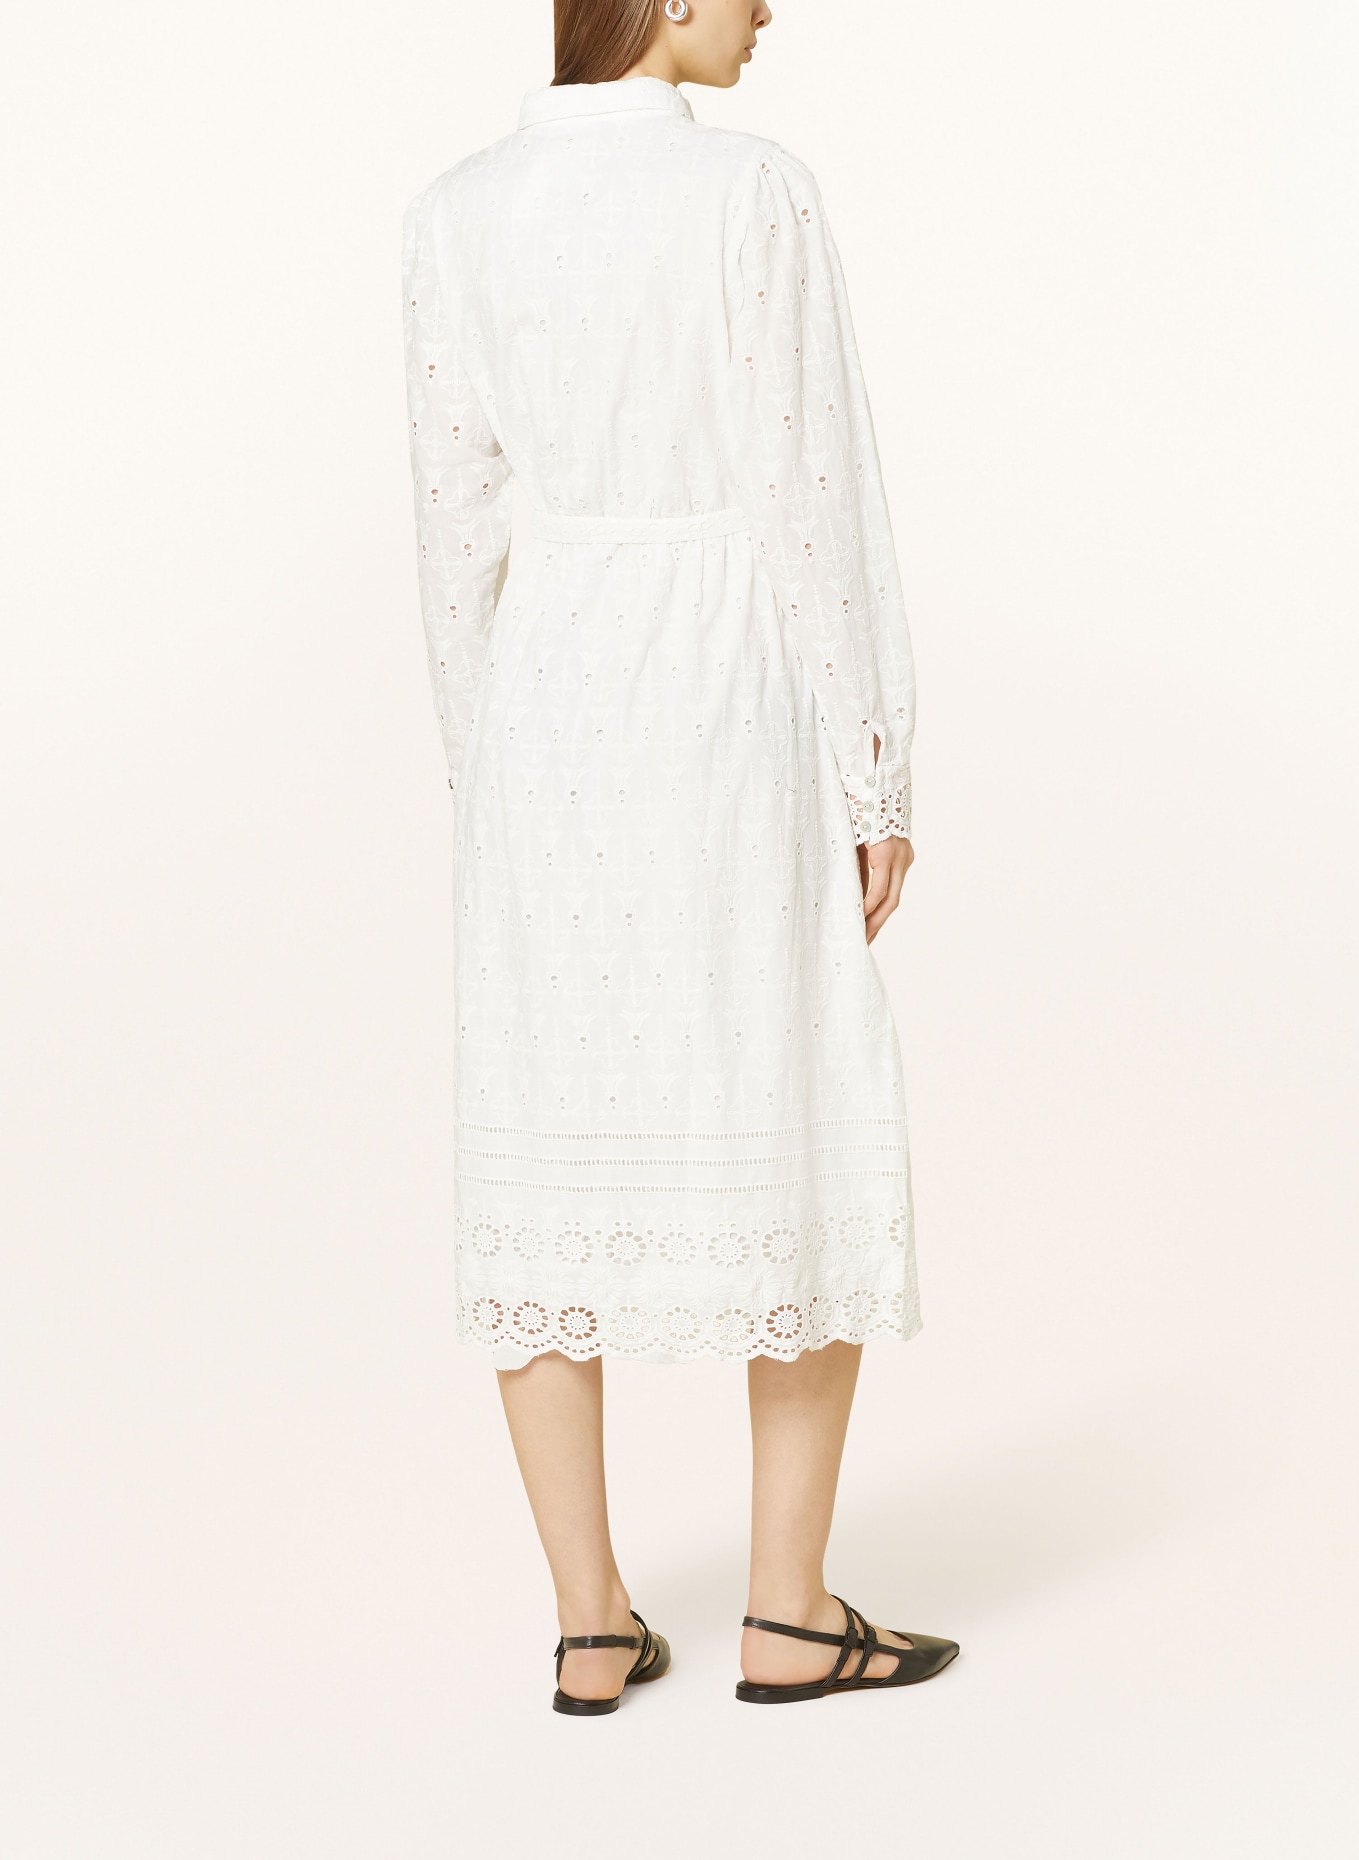 ROUGE VILA Shirt dress made of lace, Color: WHITE (Image 3)